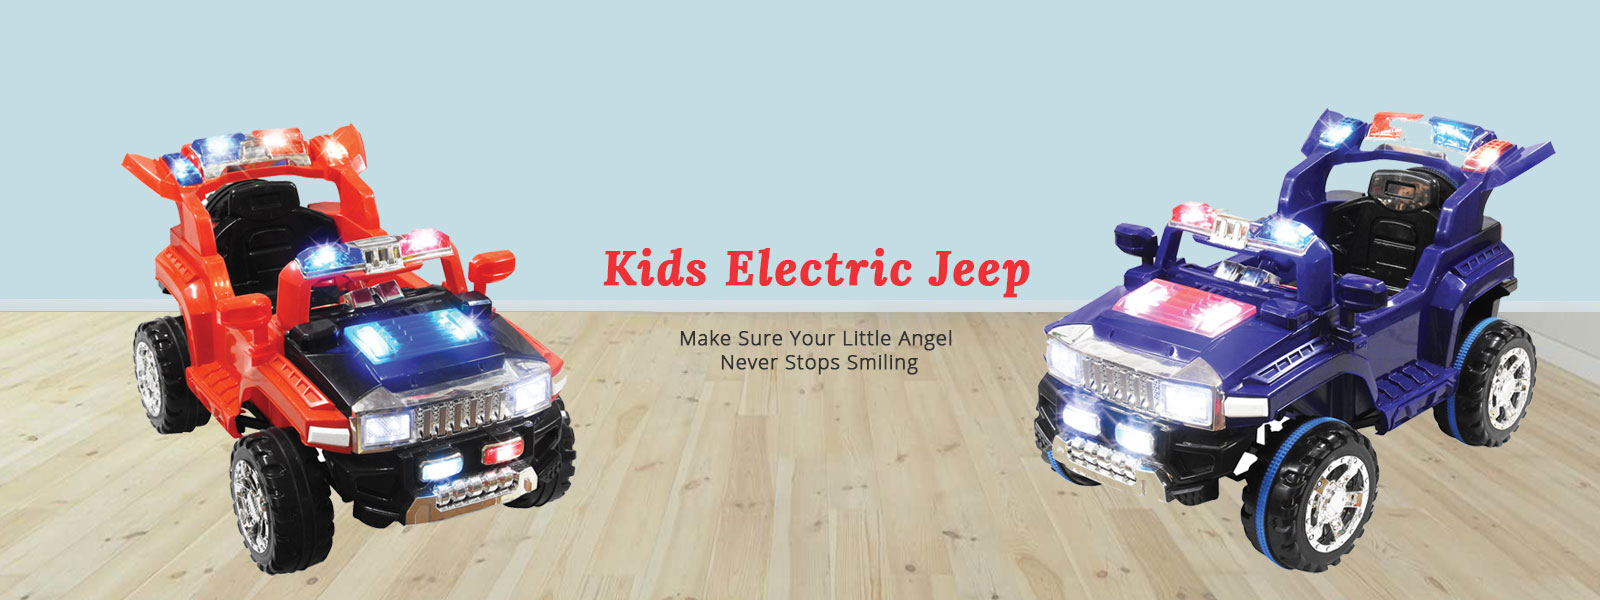 Kids Electric Jeep Manufacturers in Ghaziabad